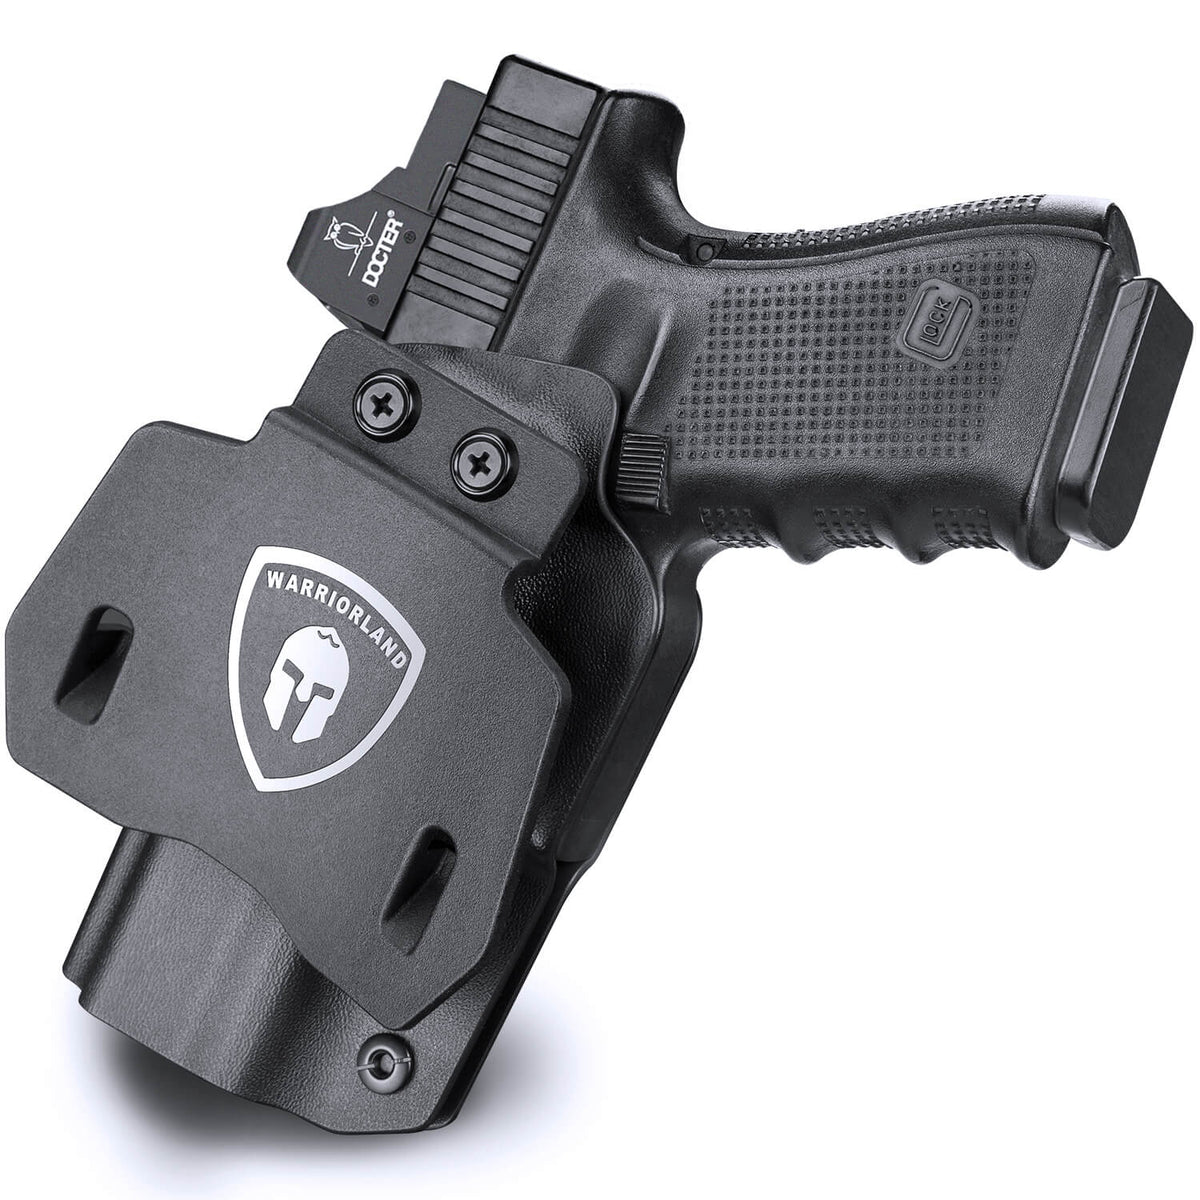 Kydex OWB Paddle Holster with red dot optics cut for Glock 17 19 23 26 32 Gen 4 5 19X 44 45 Right/Left Handed | WARRIORLAND